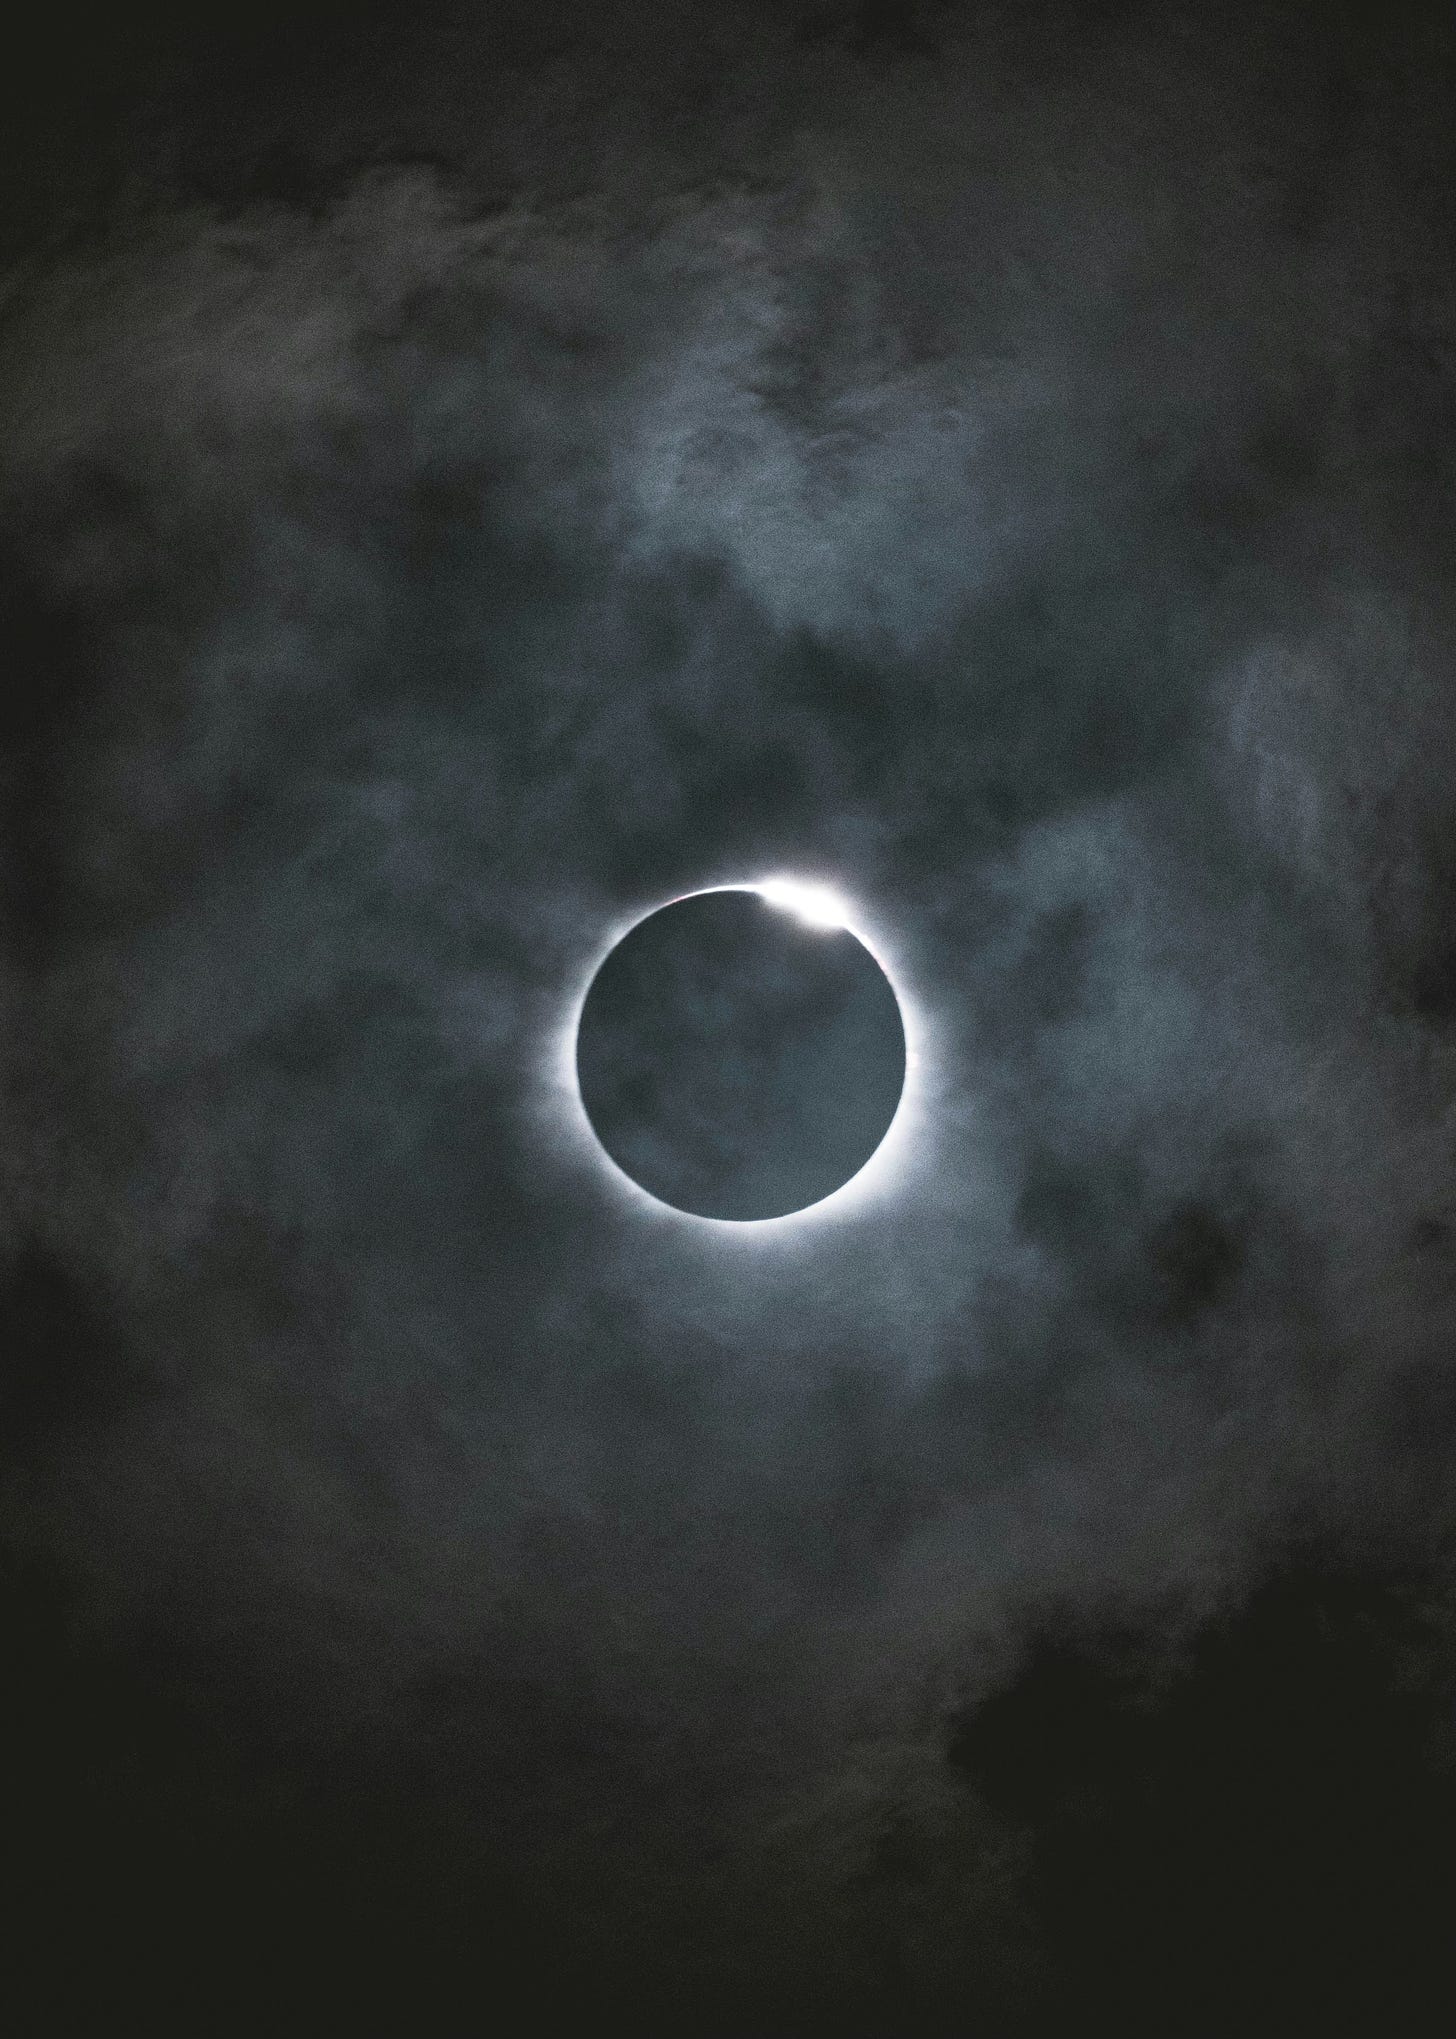 A solar eclipse at the time of totality taken by Jordan Conner, Unsplash